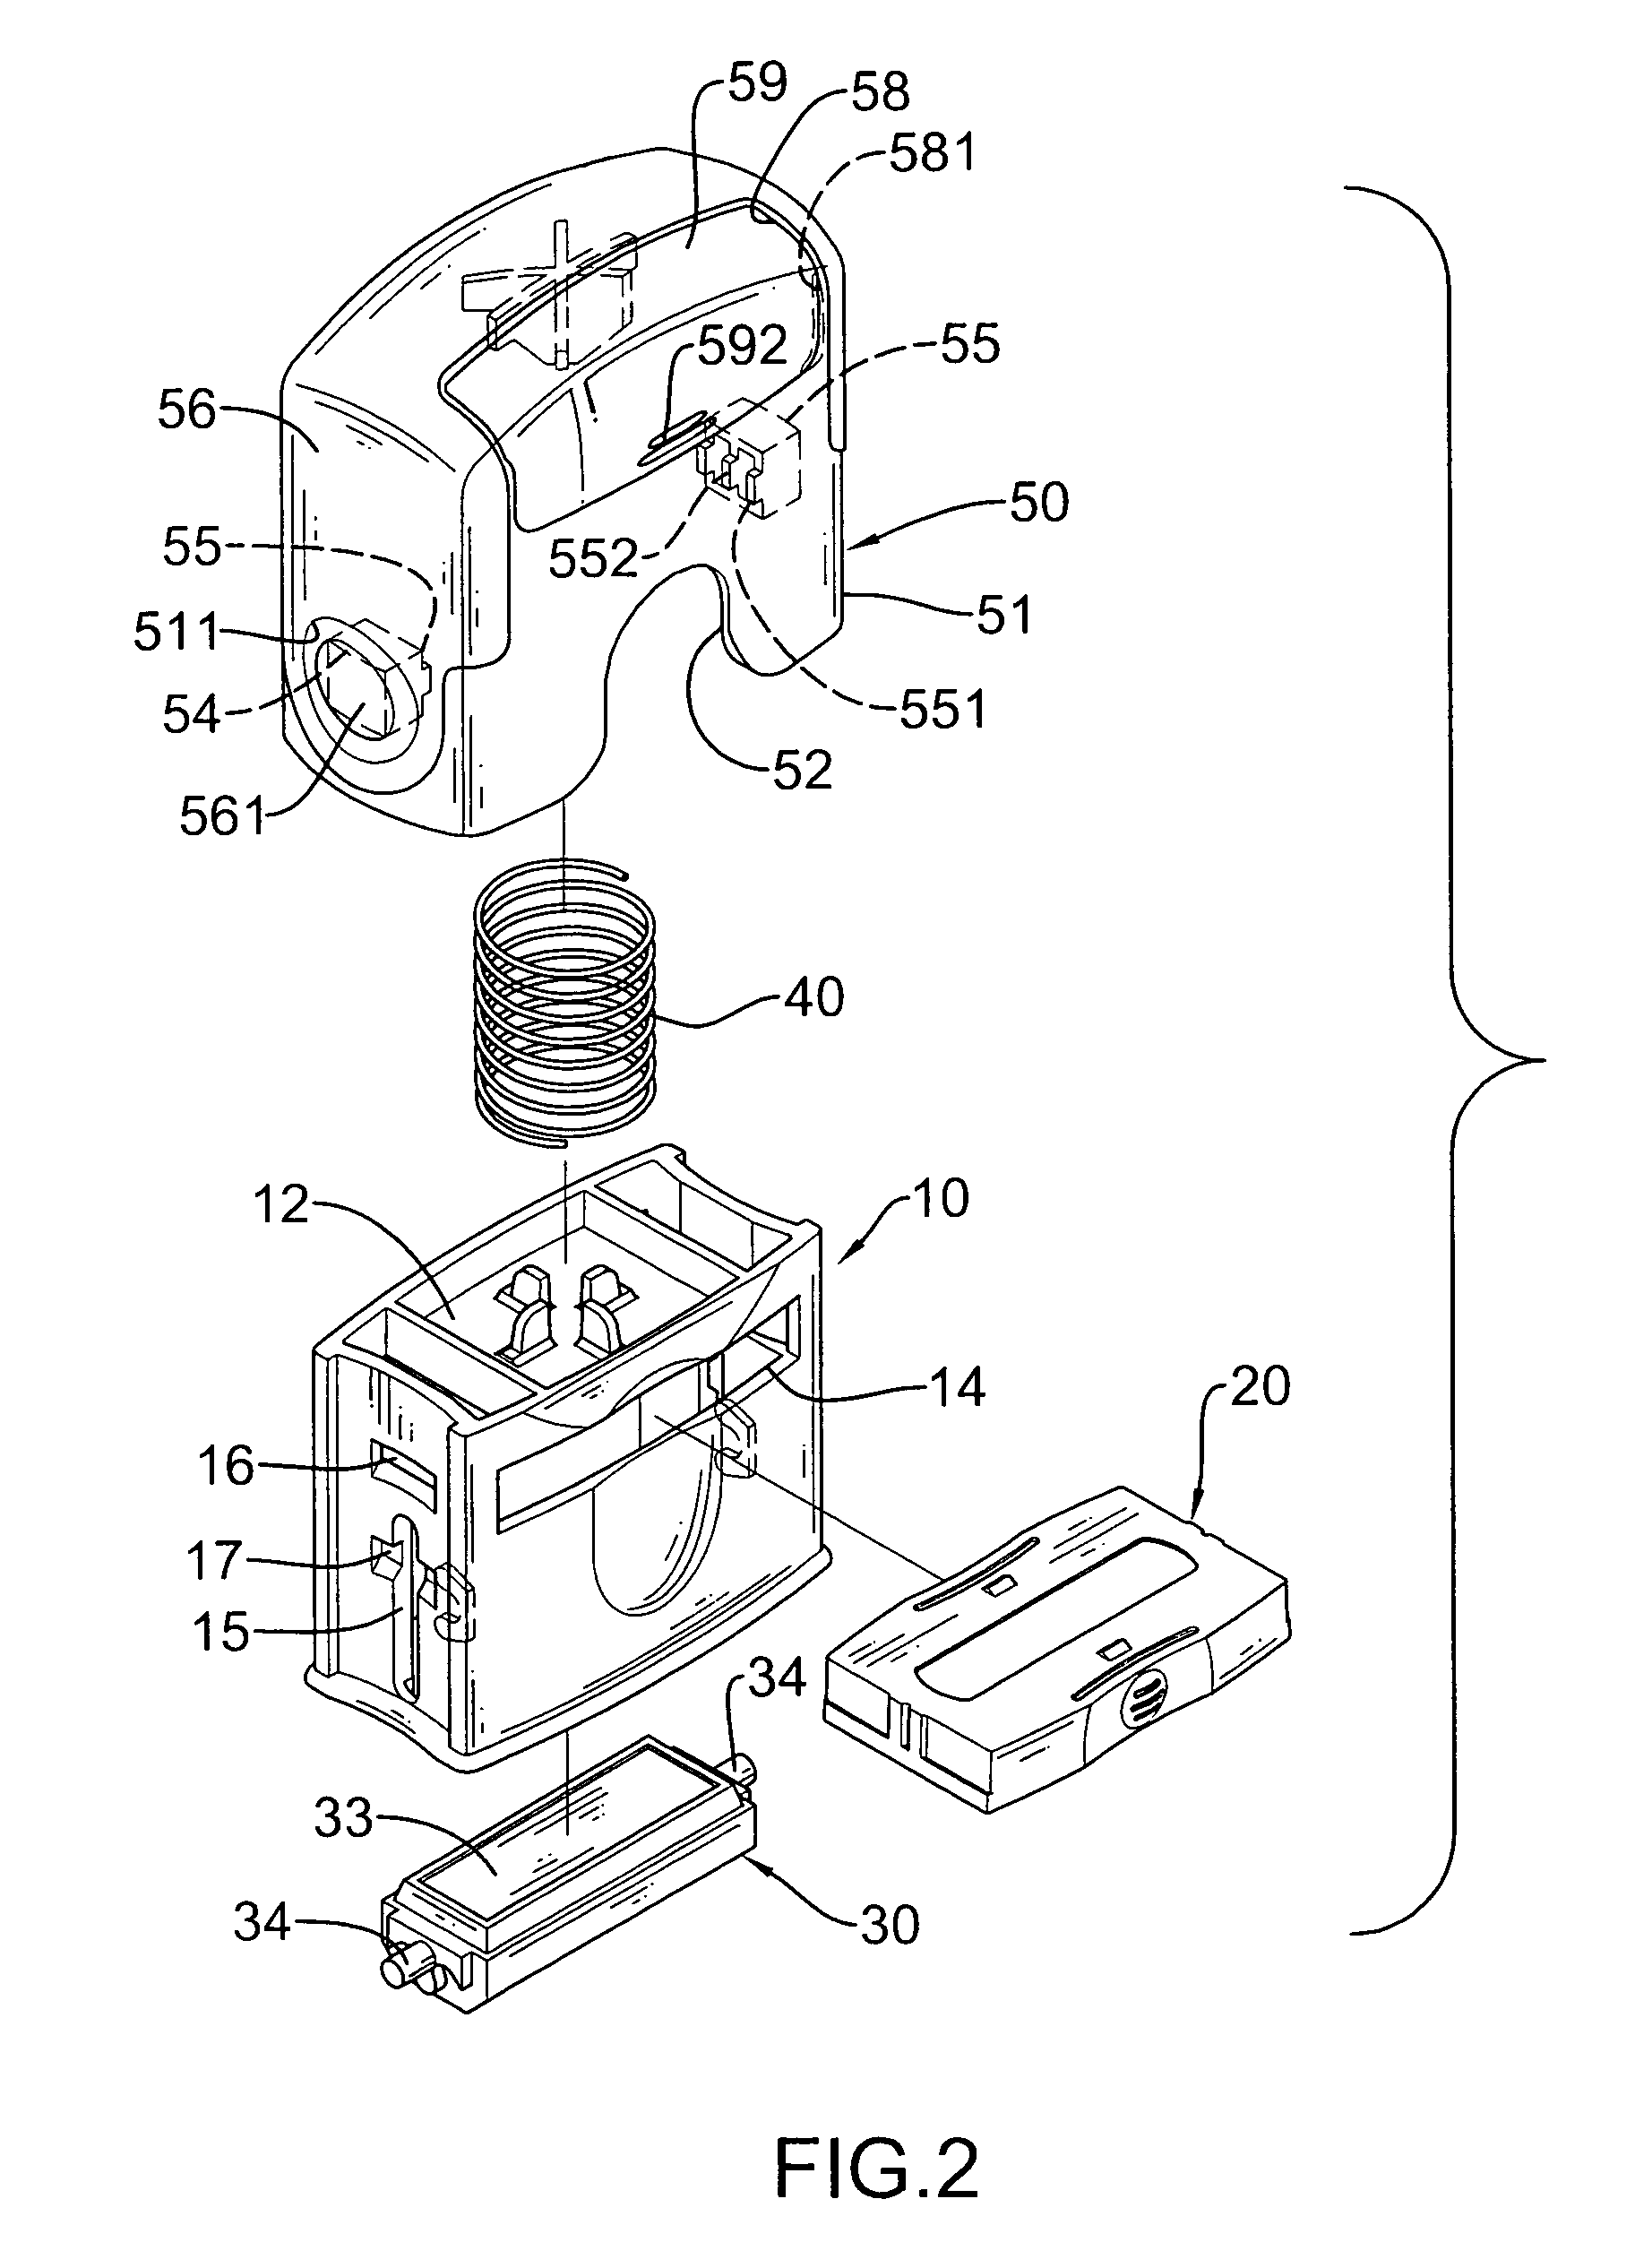 Housing assembly for a self-inking stamp